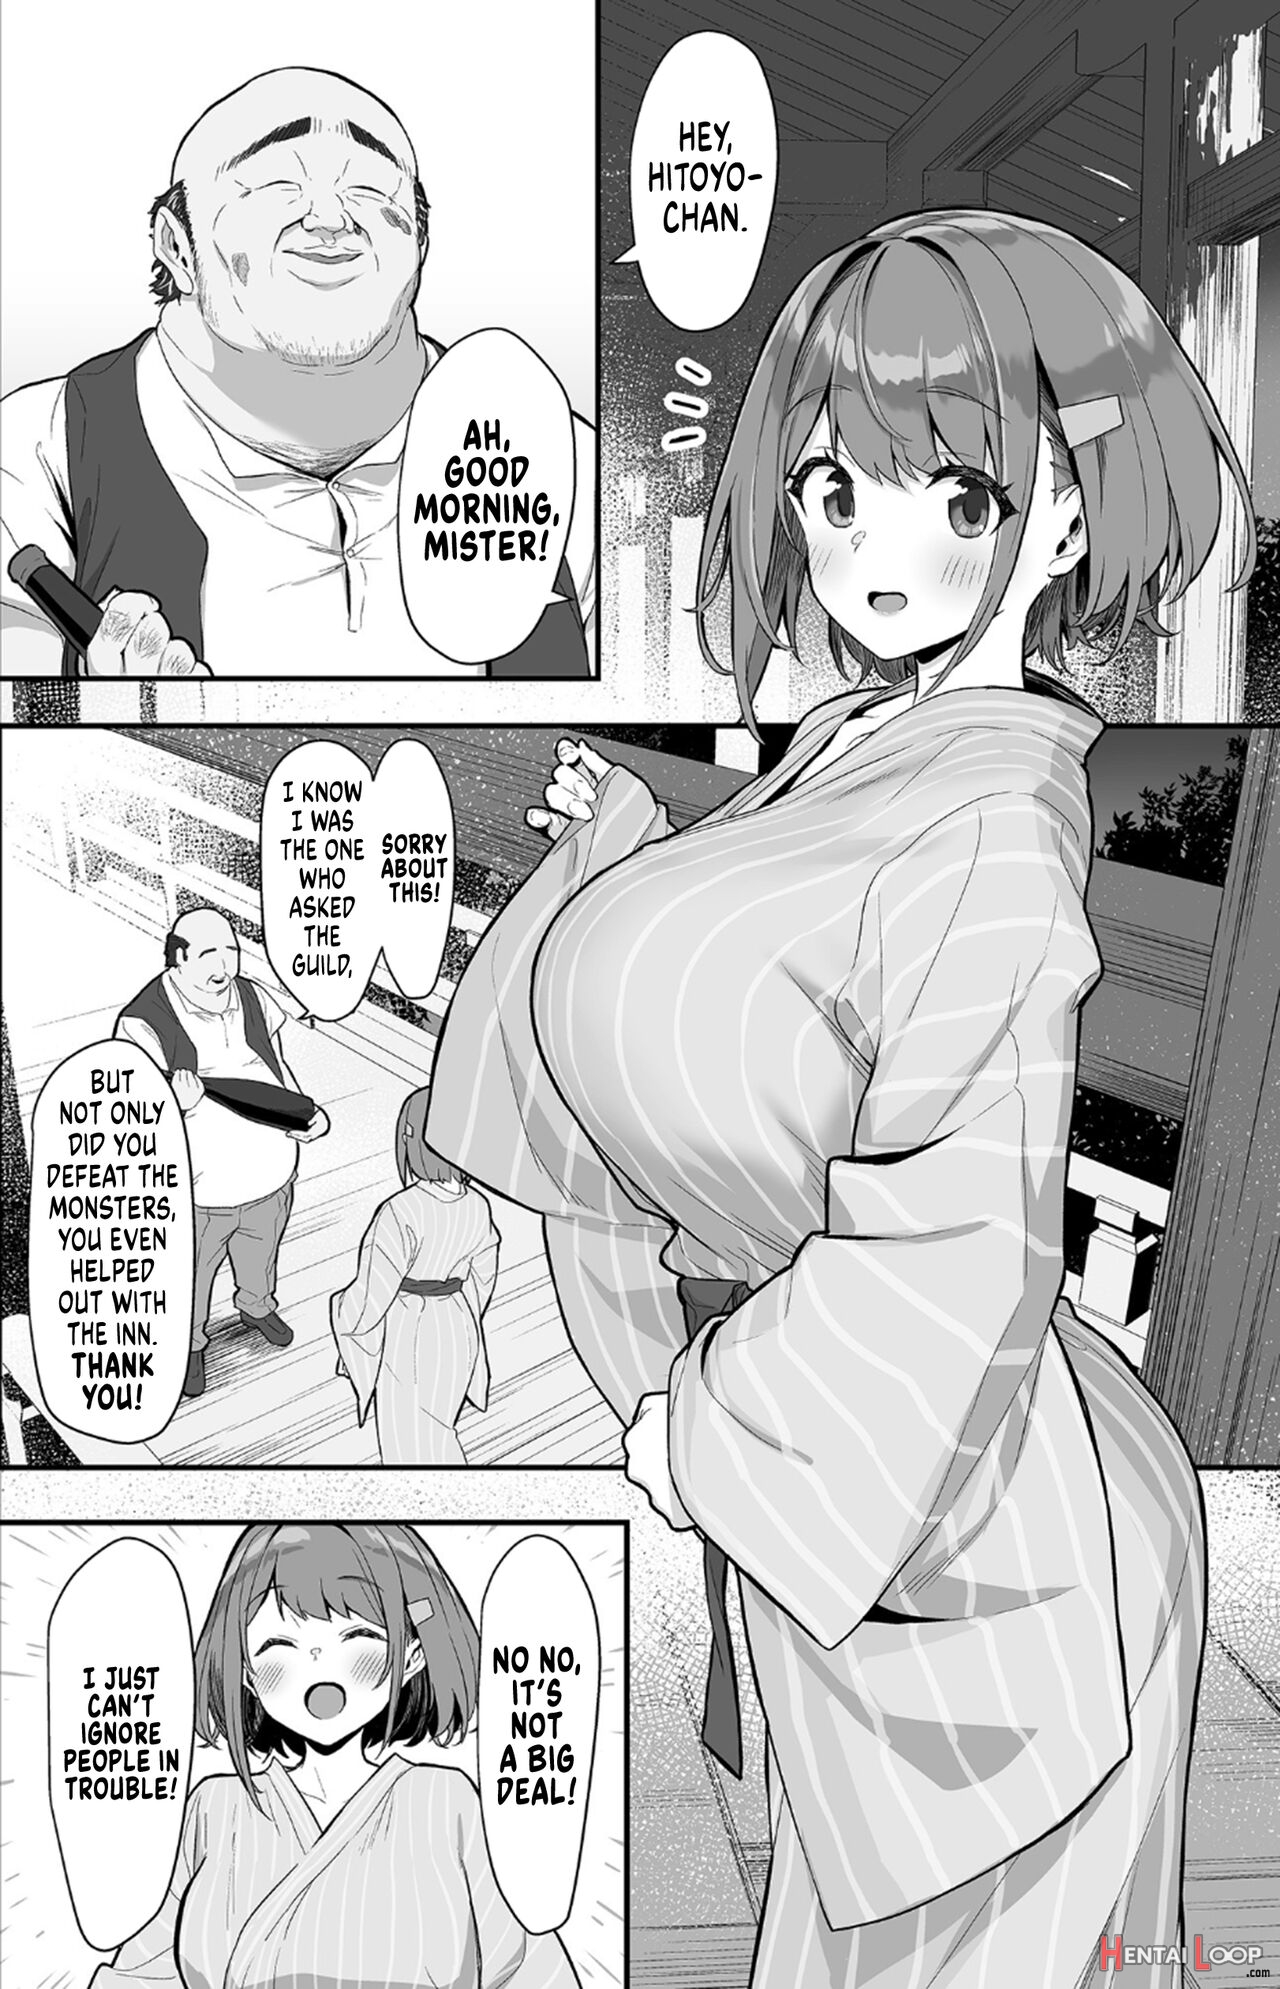 Hitoyo-chan's Suffering 2 page 4